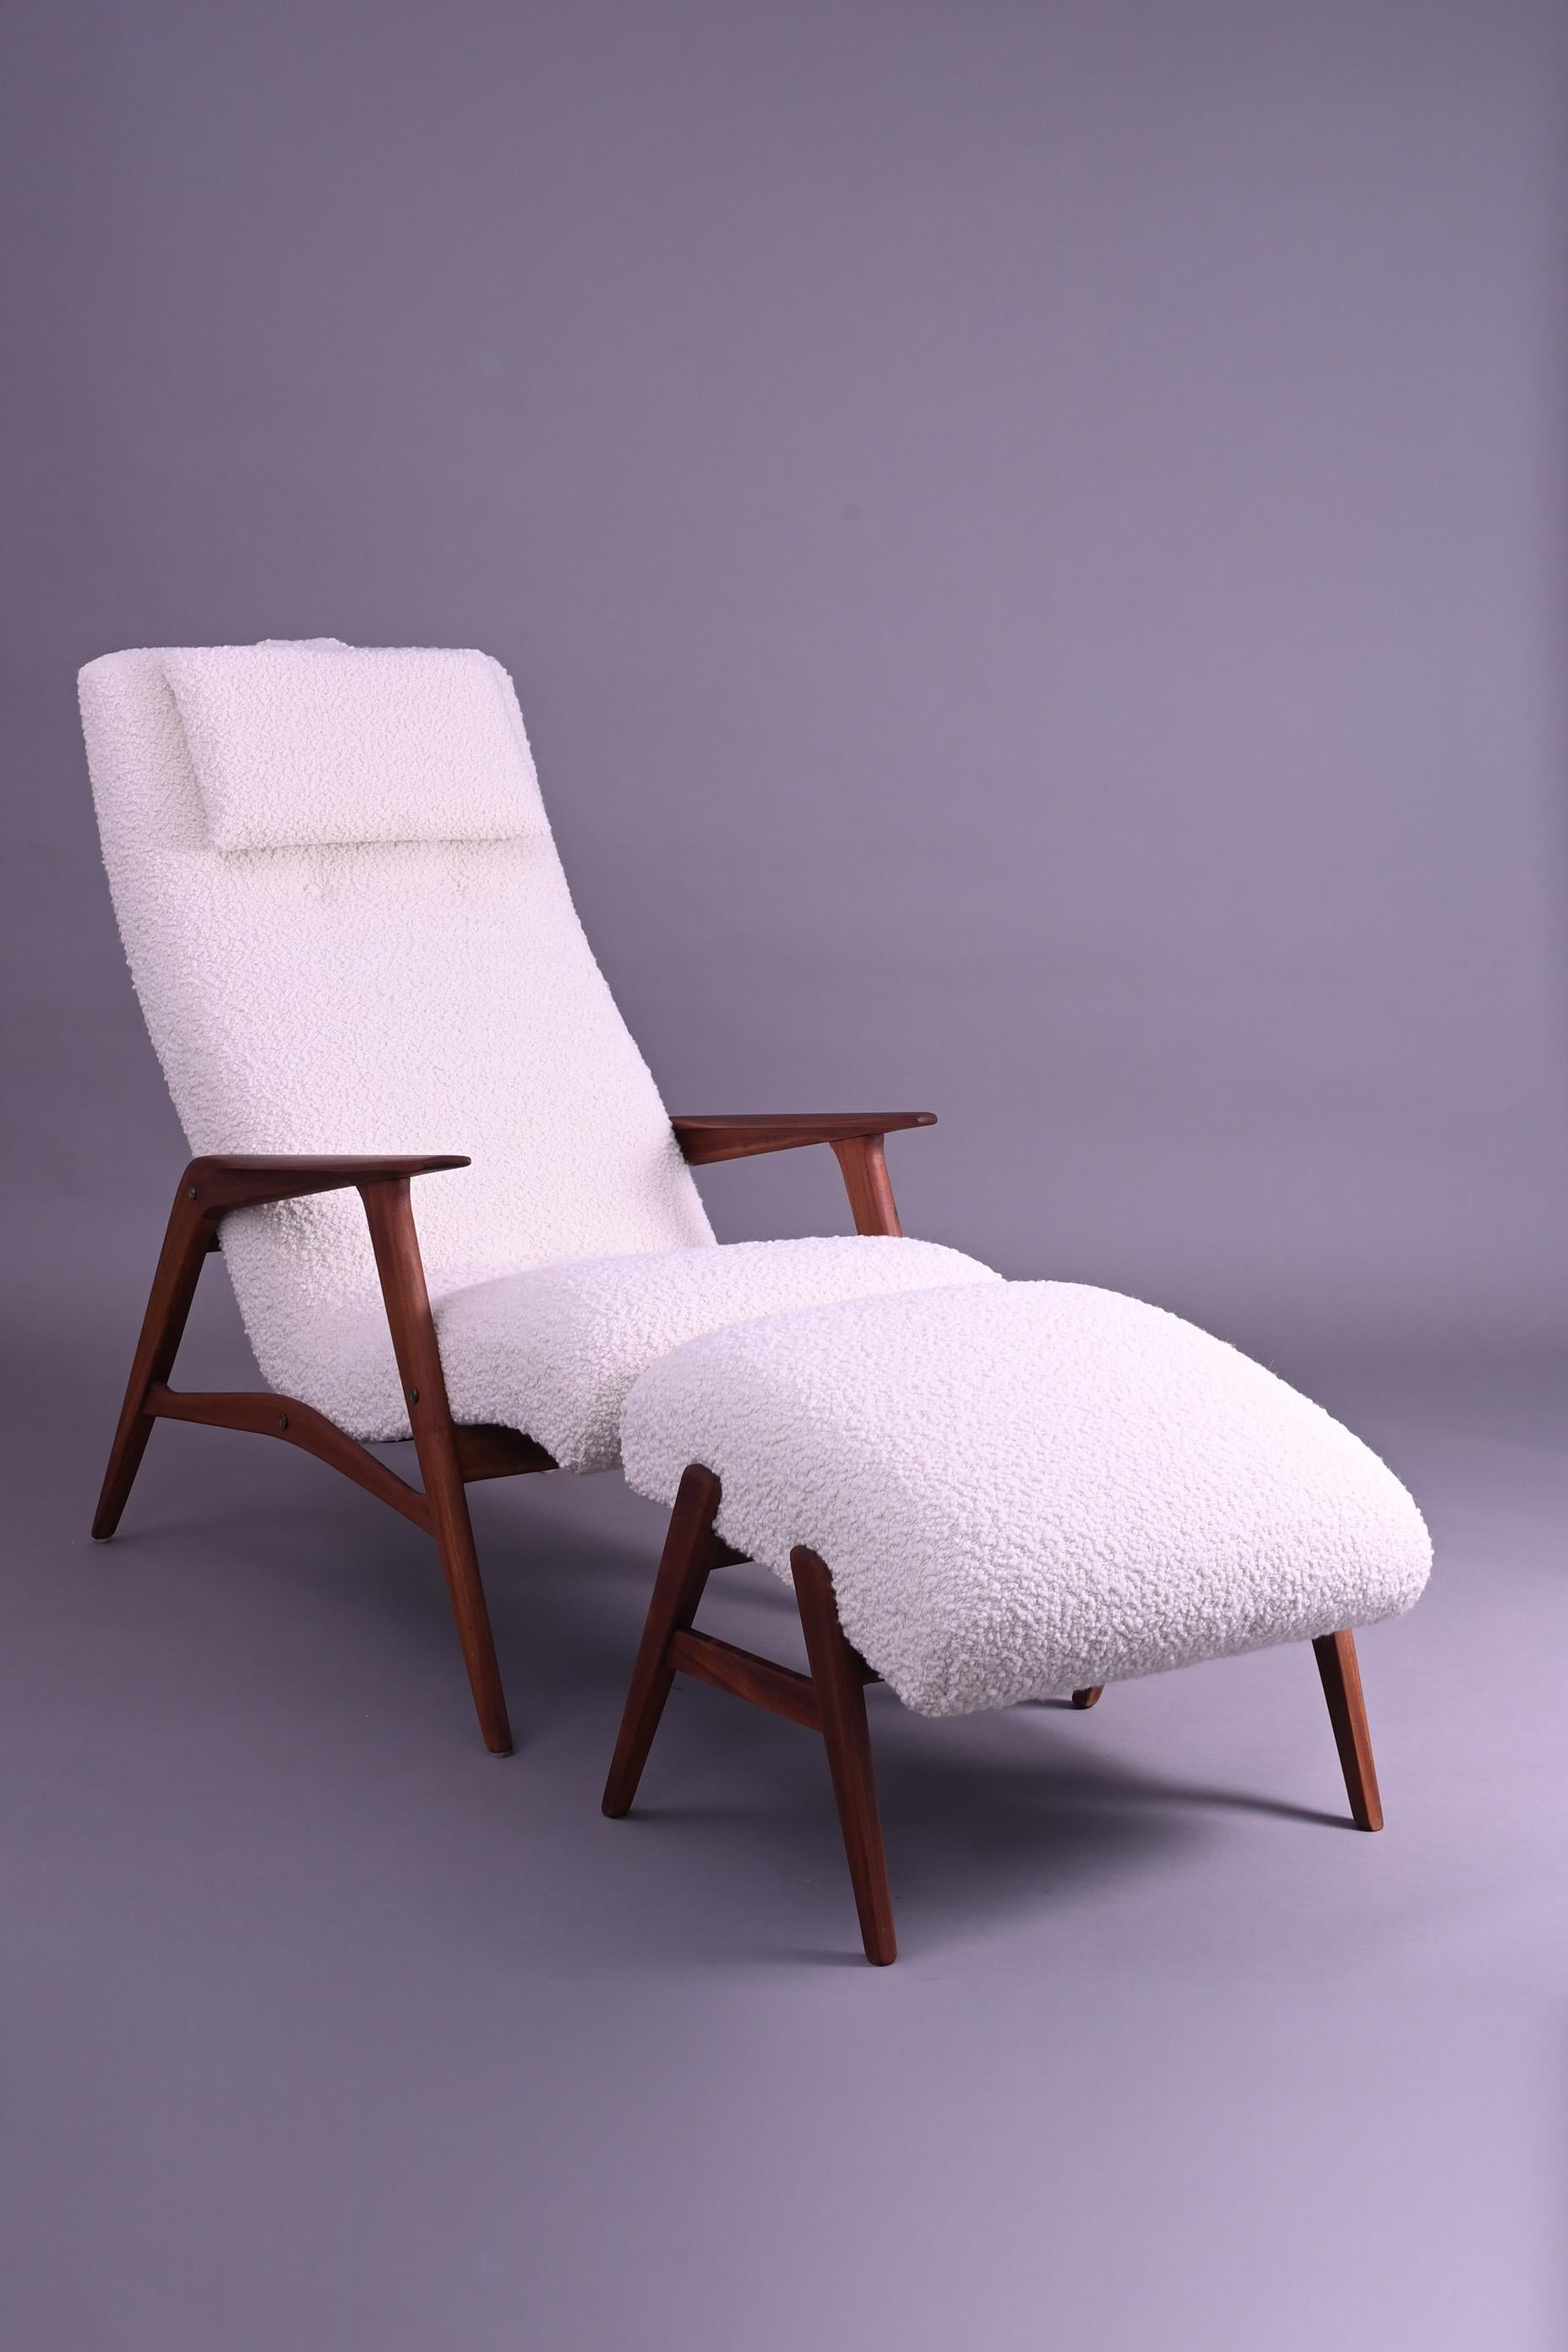 1960s 'Siesta' Chair and Ottoman by Jio Mobler 1